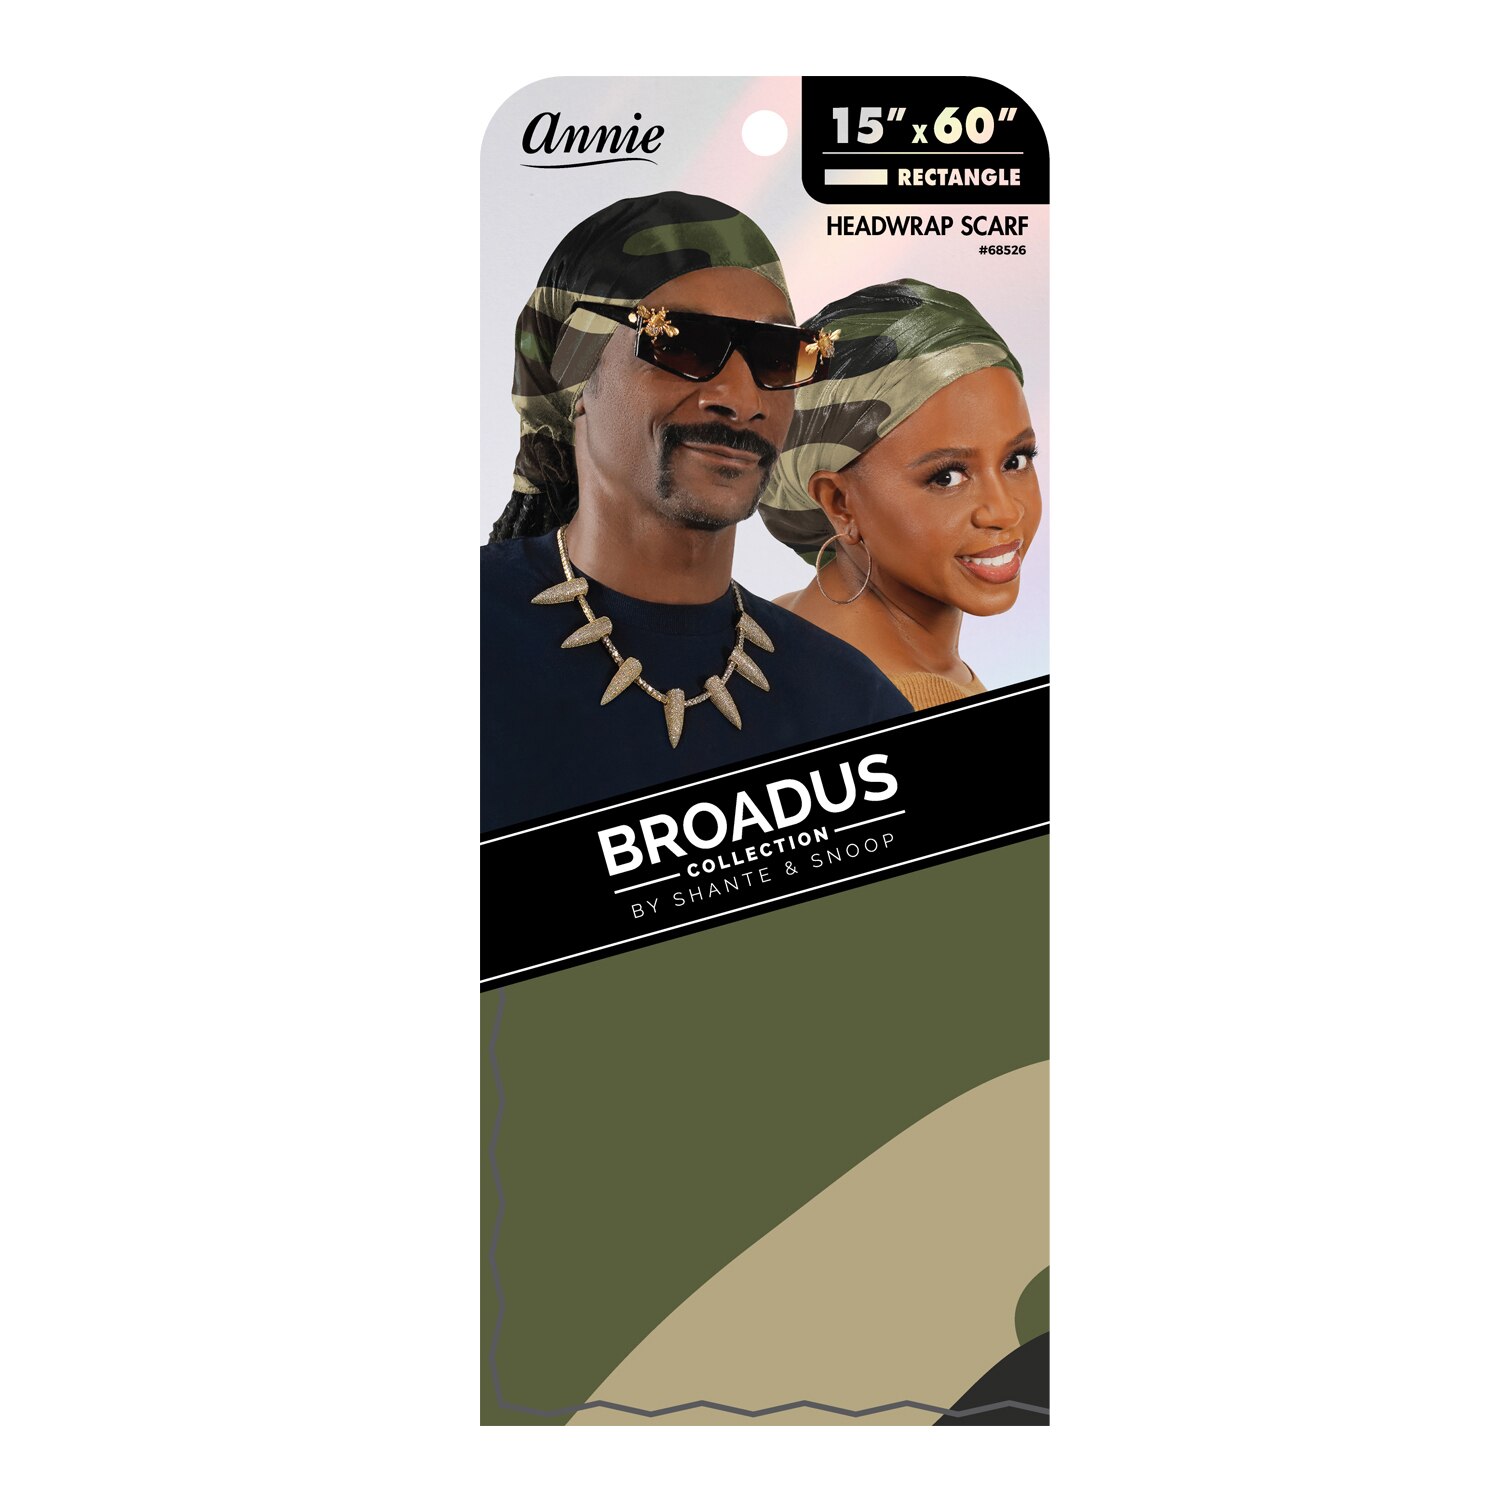 Annie Broadus Collection Headwrap Scarf, Camo, 60 In. X 15 In. , CVS